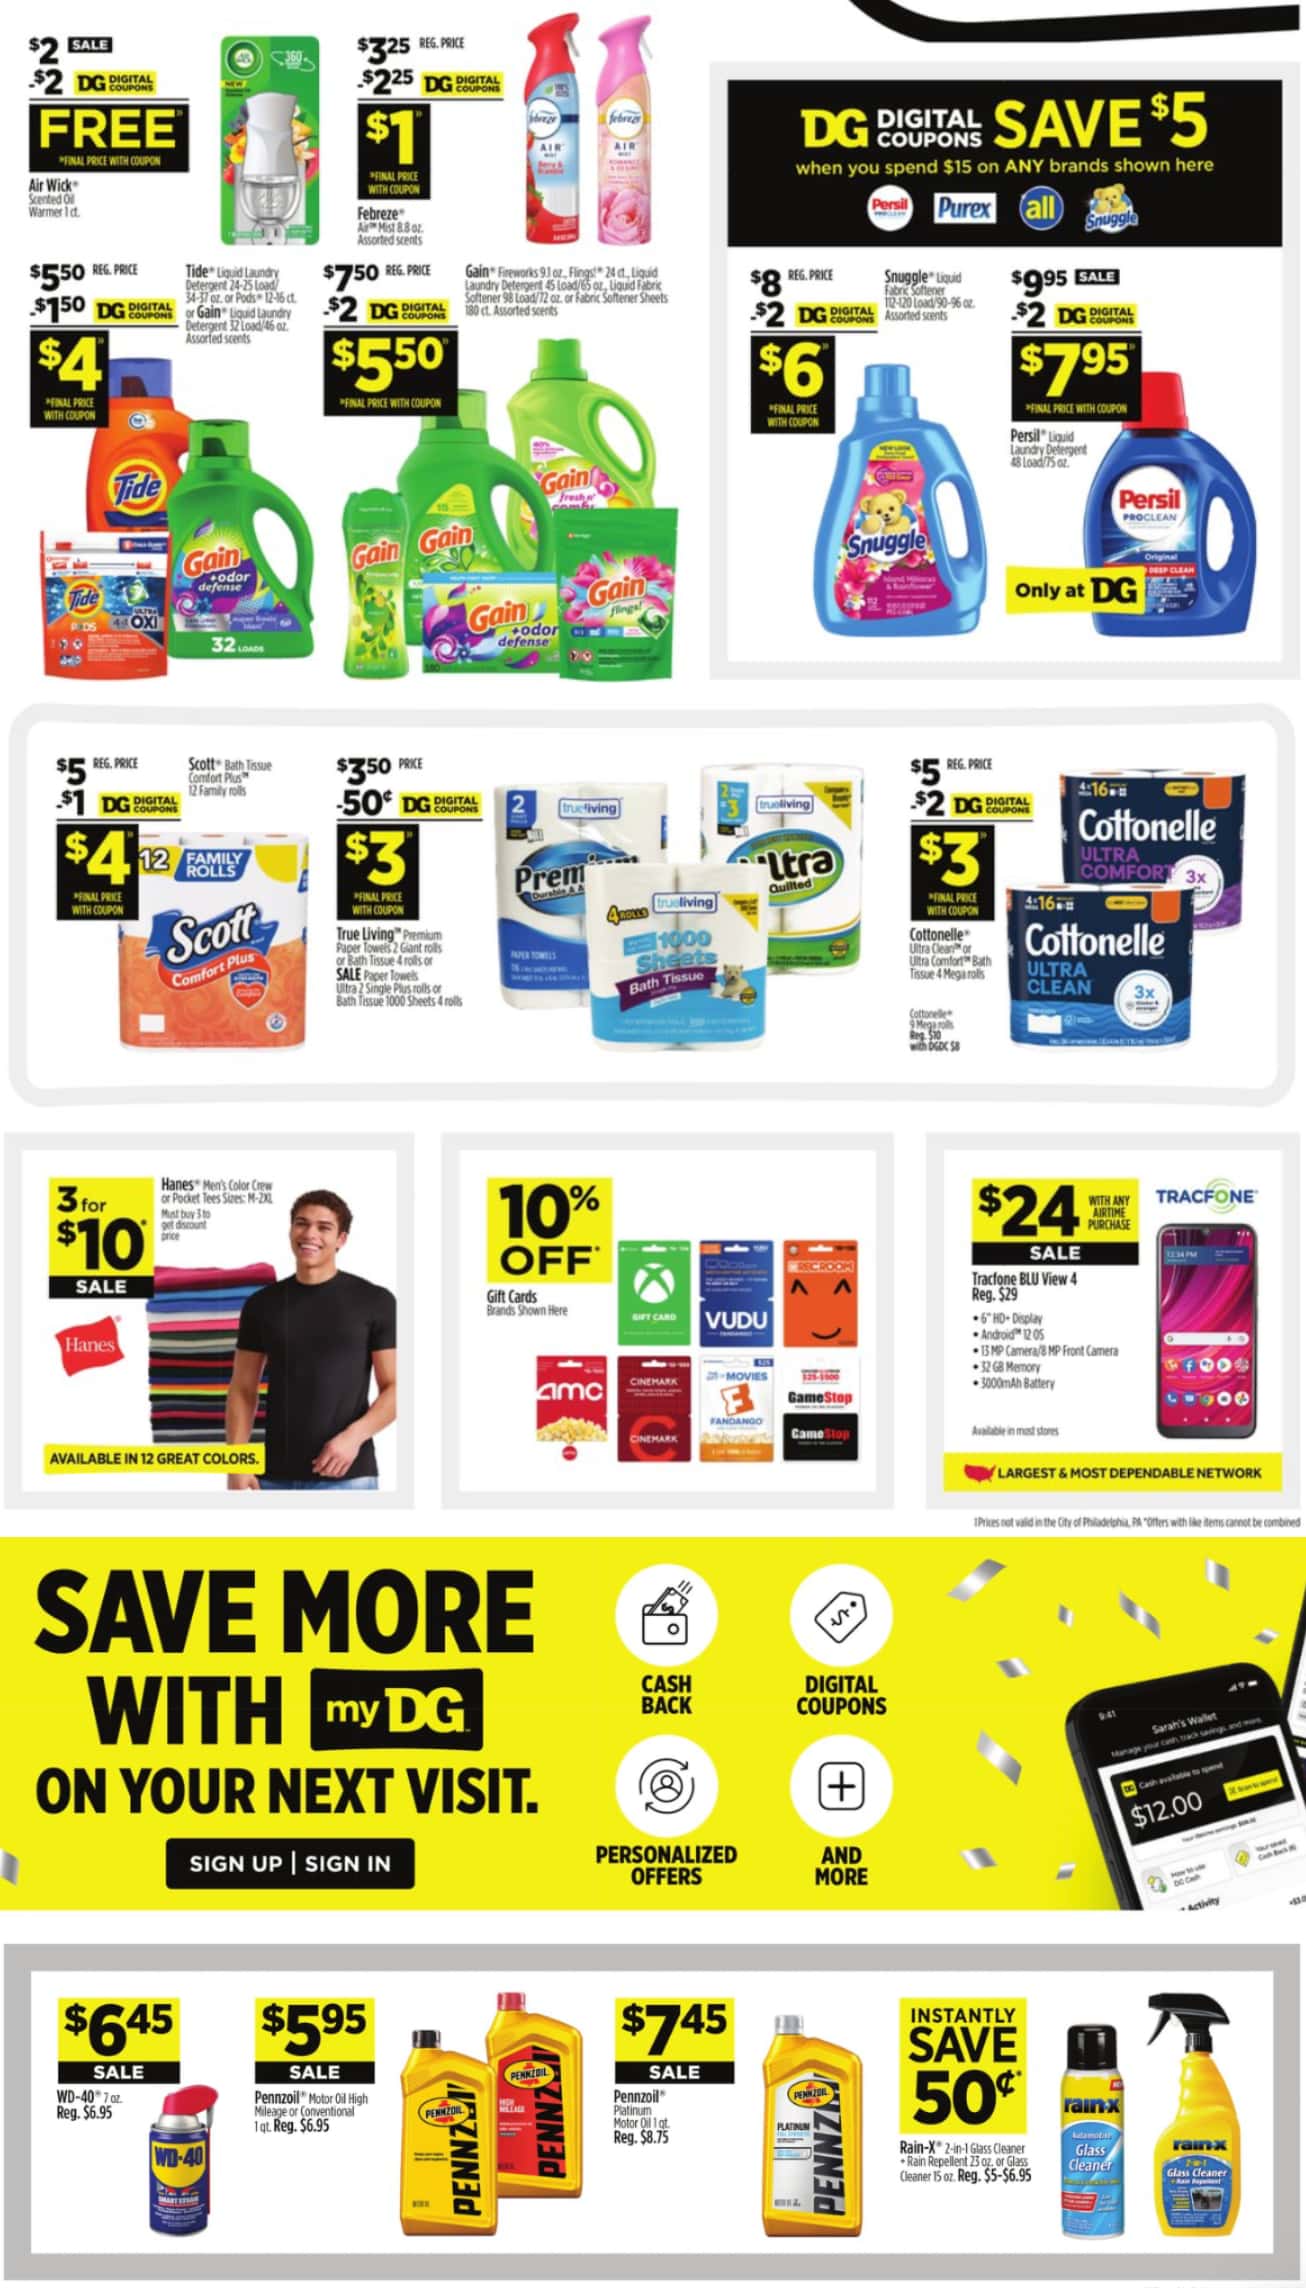 DollarGeneral_weekly_ad_041424_02